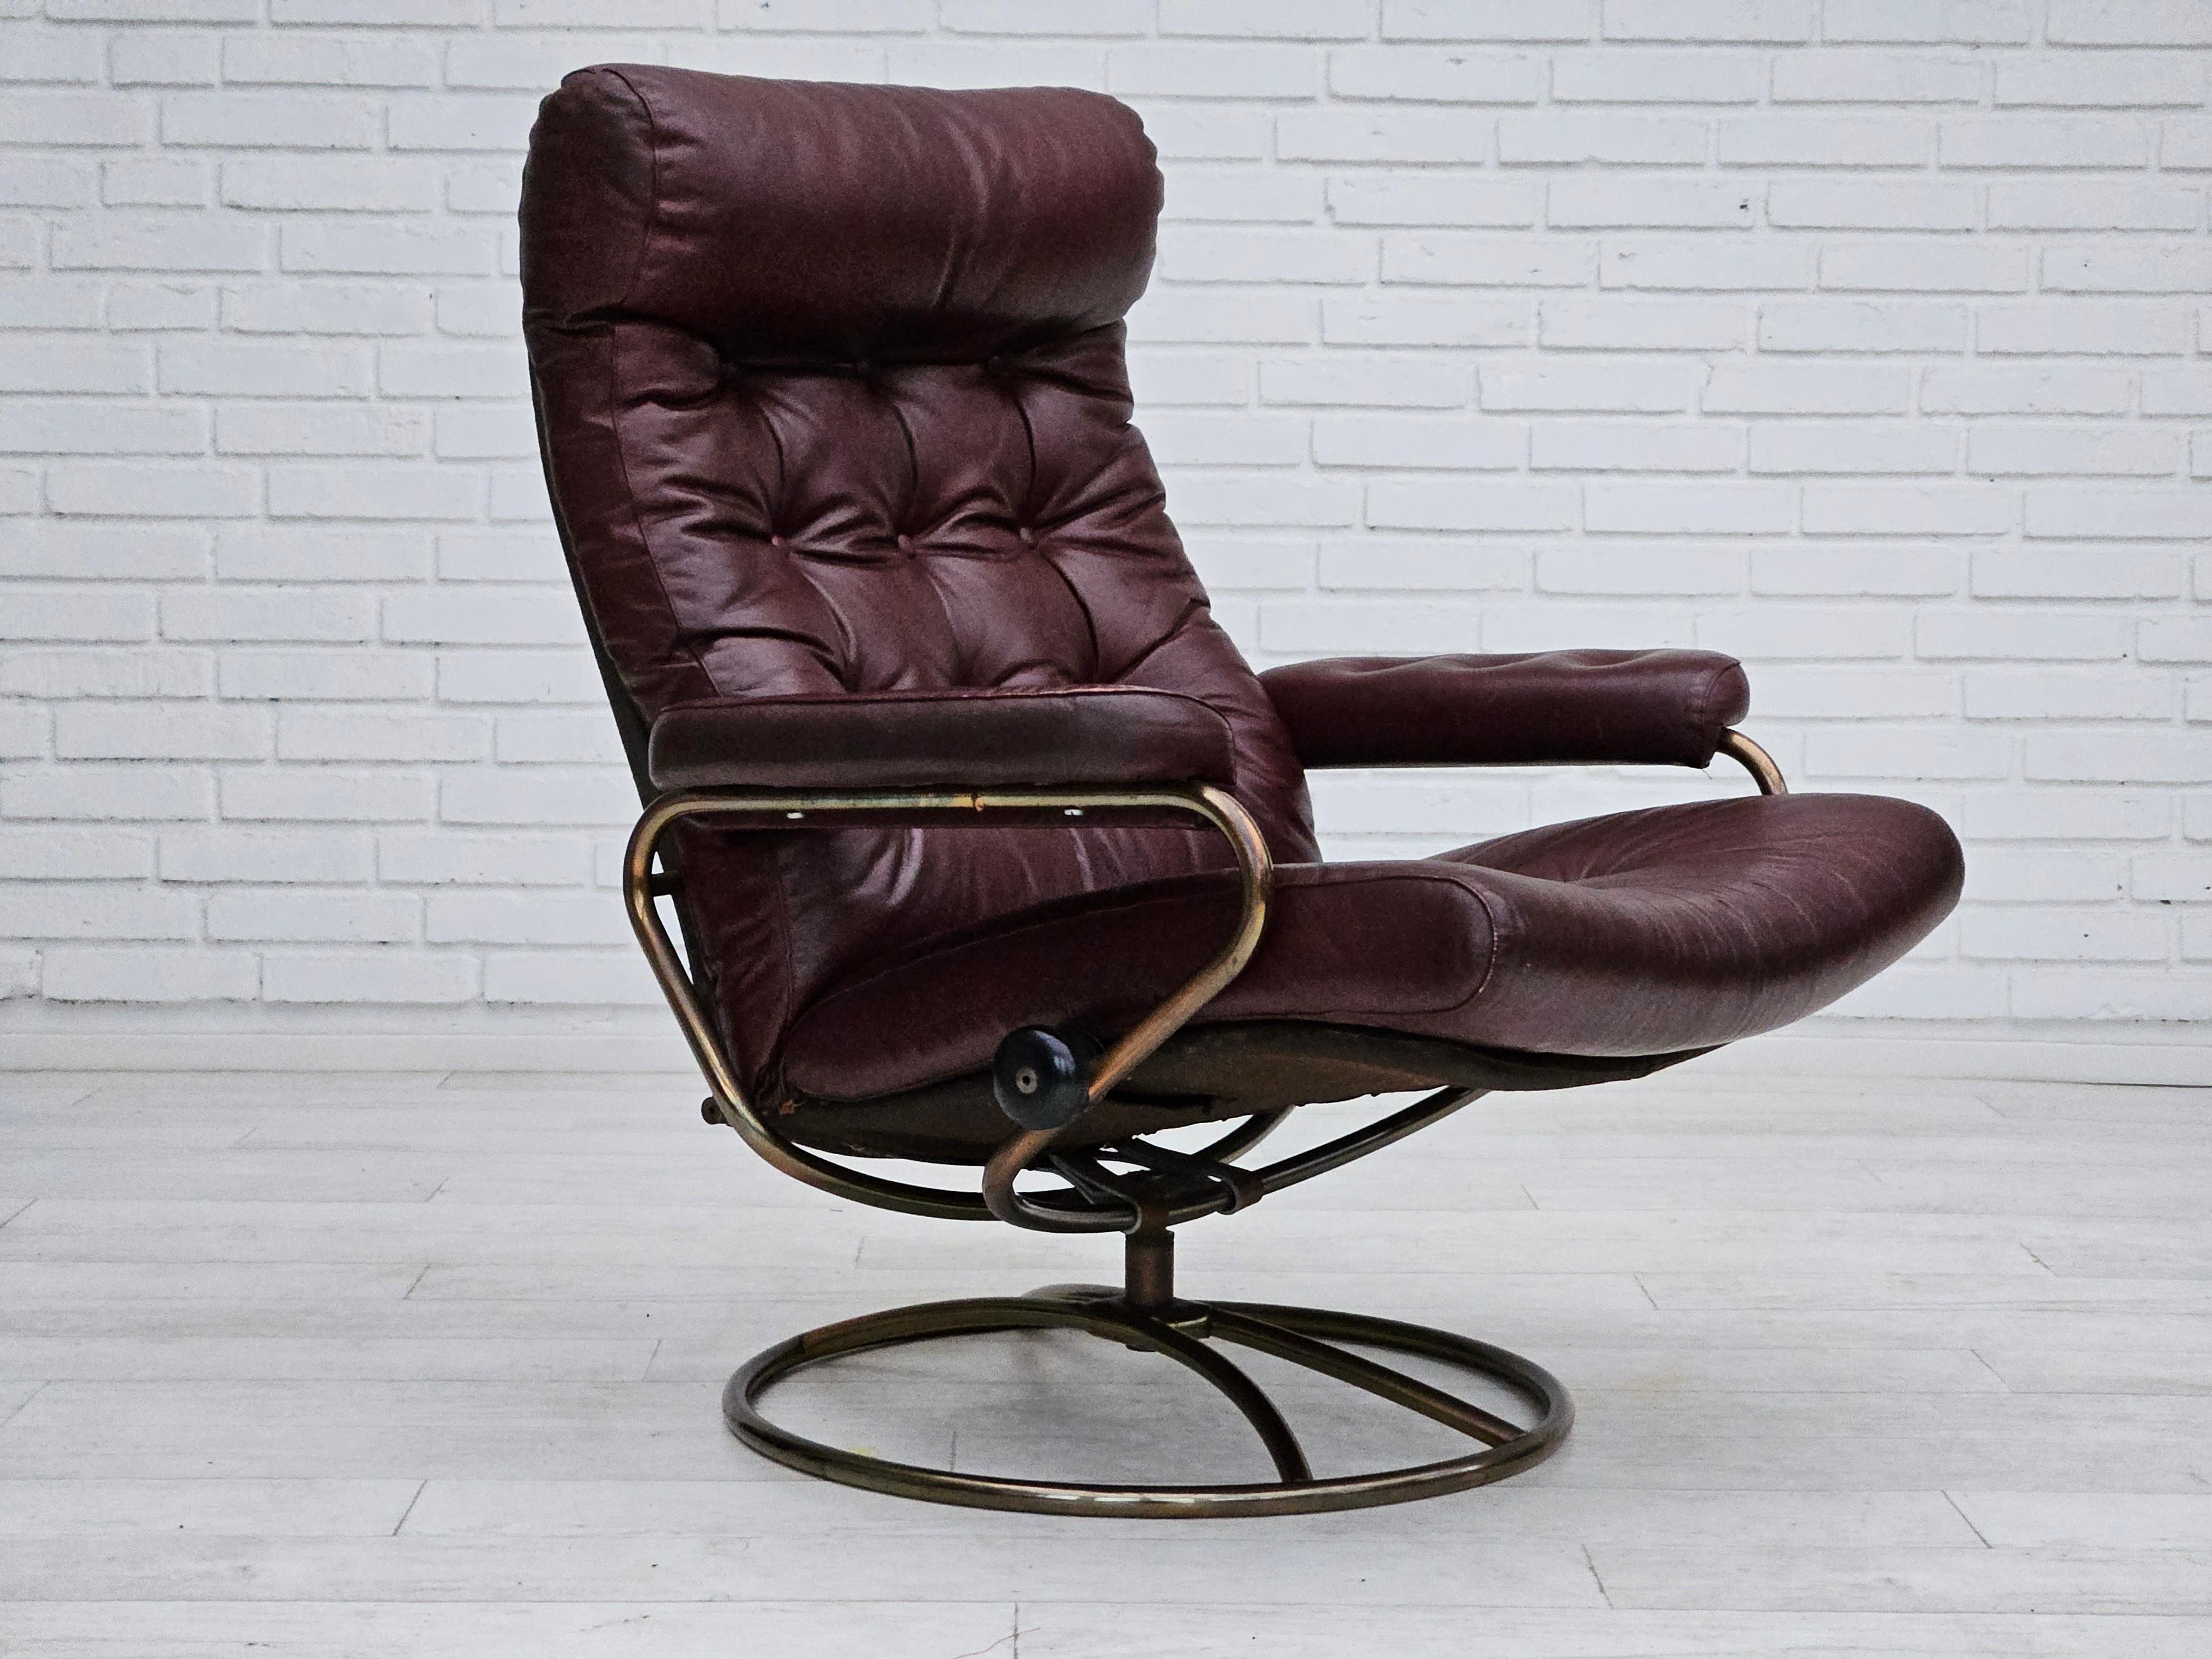 1970s, Norwegian relax swivel chair by Stressless. Original very good condition: no smells and no stains. Original brown leather and rounded base. Adjustable seats and backrests.